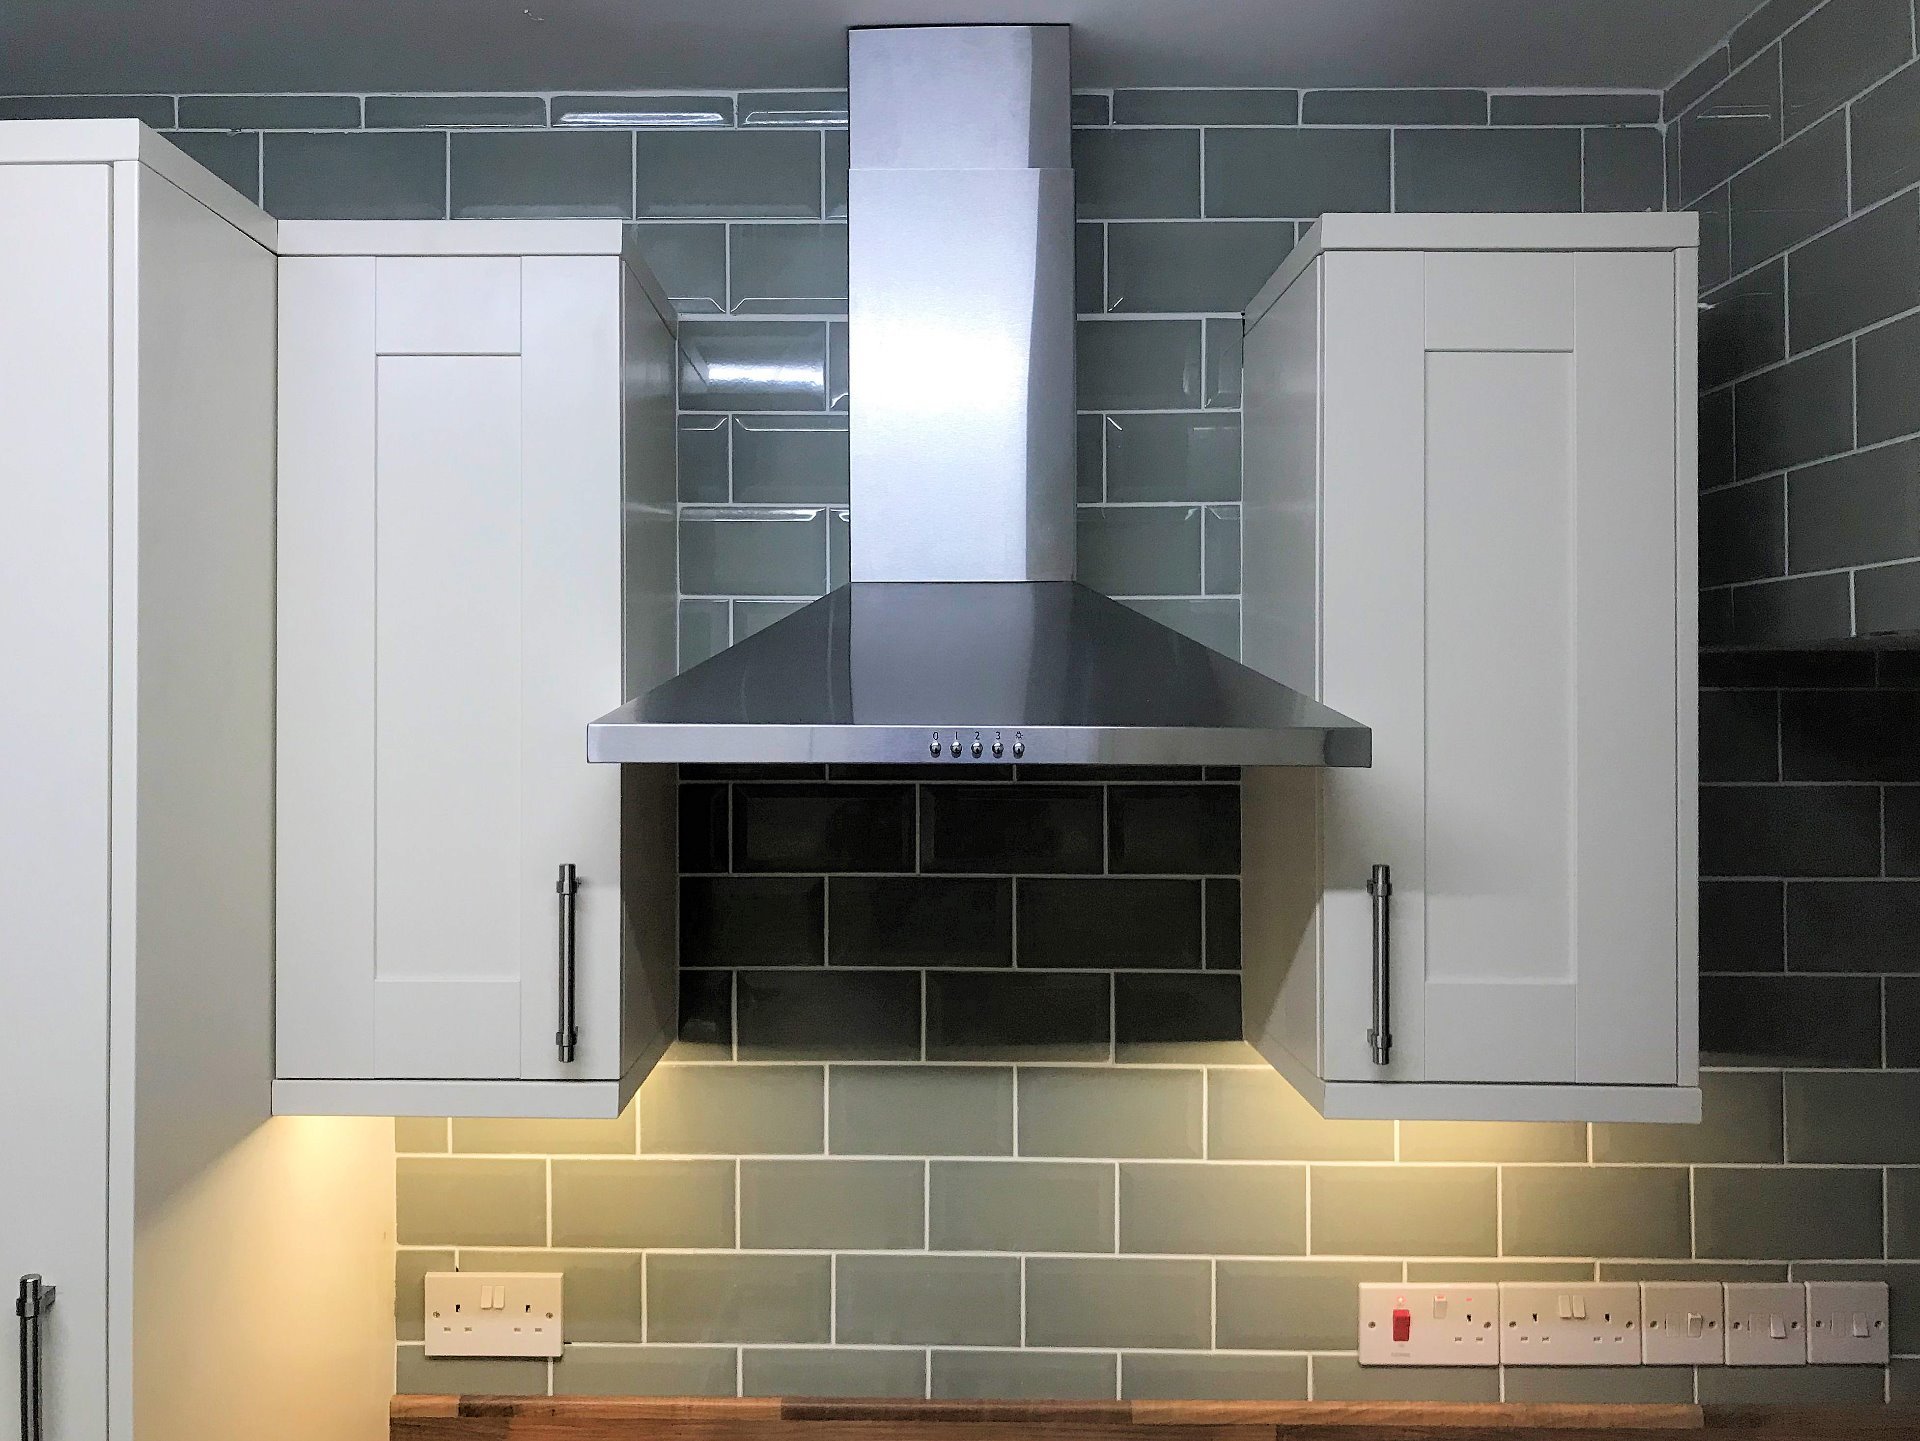 Cooker hood extractor fan with wall hung cabinet units and led lighting installation. Barnstaple North Devon